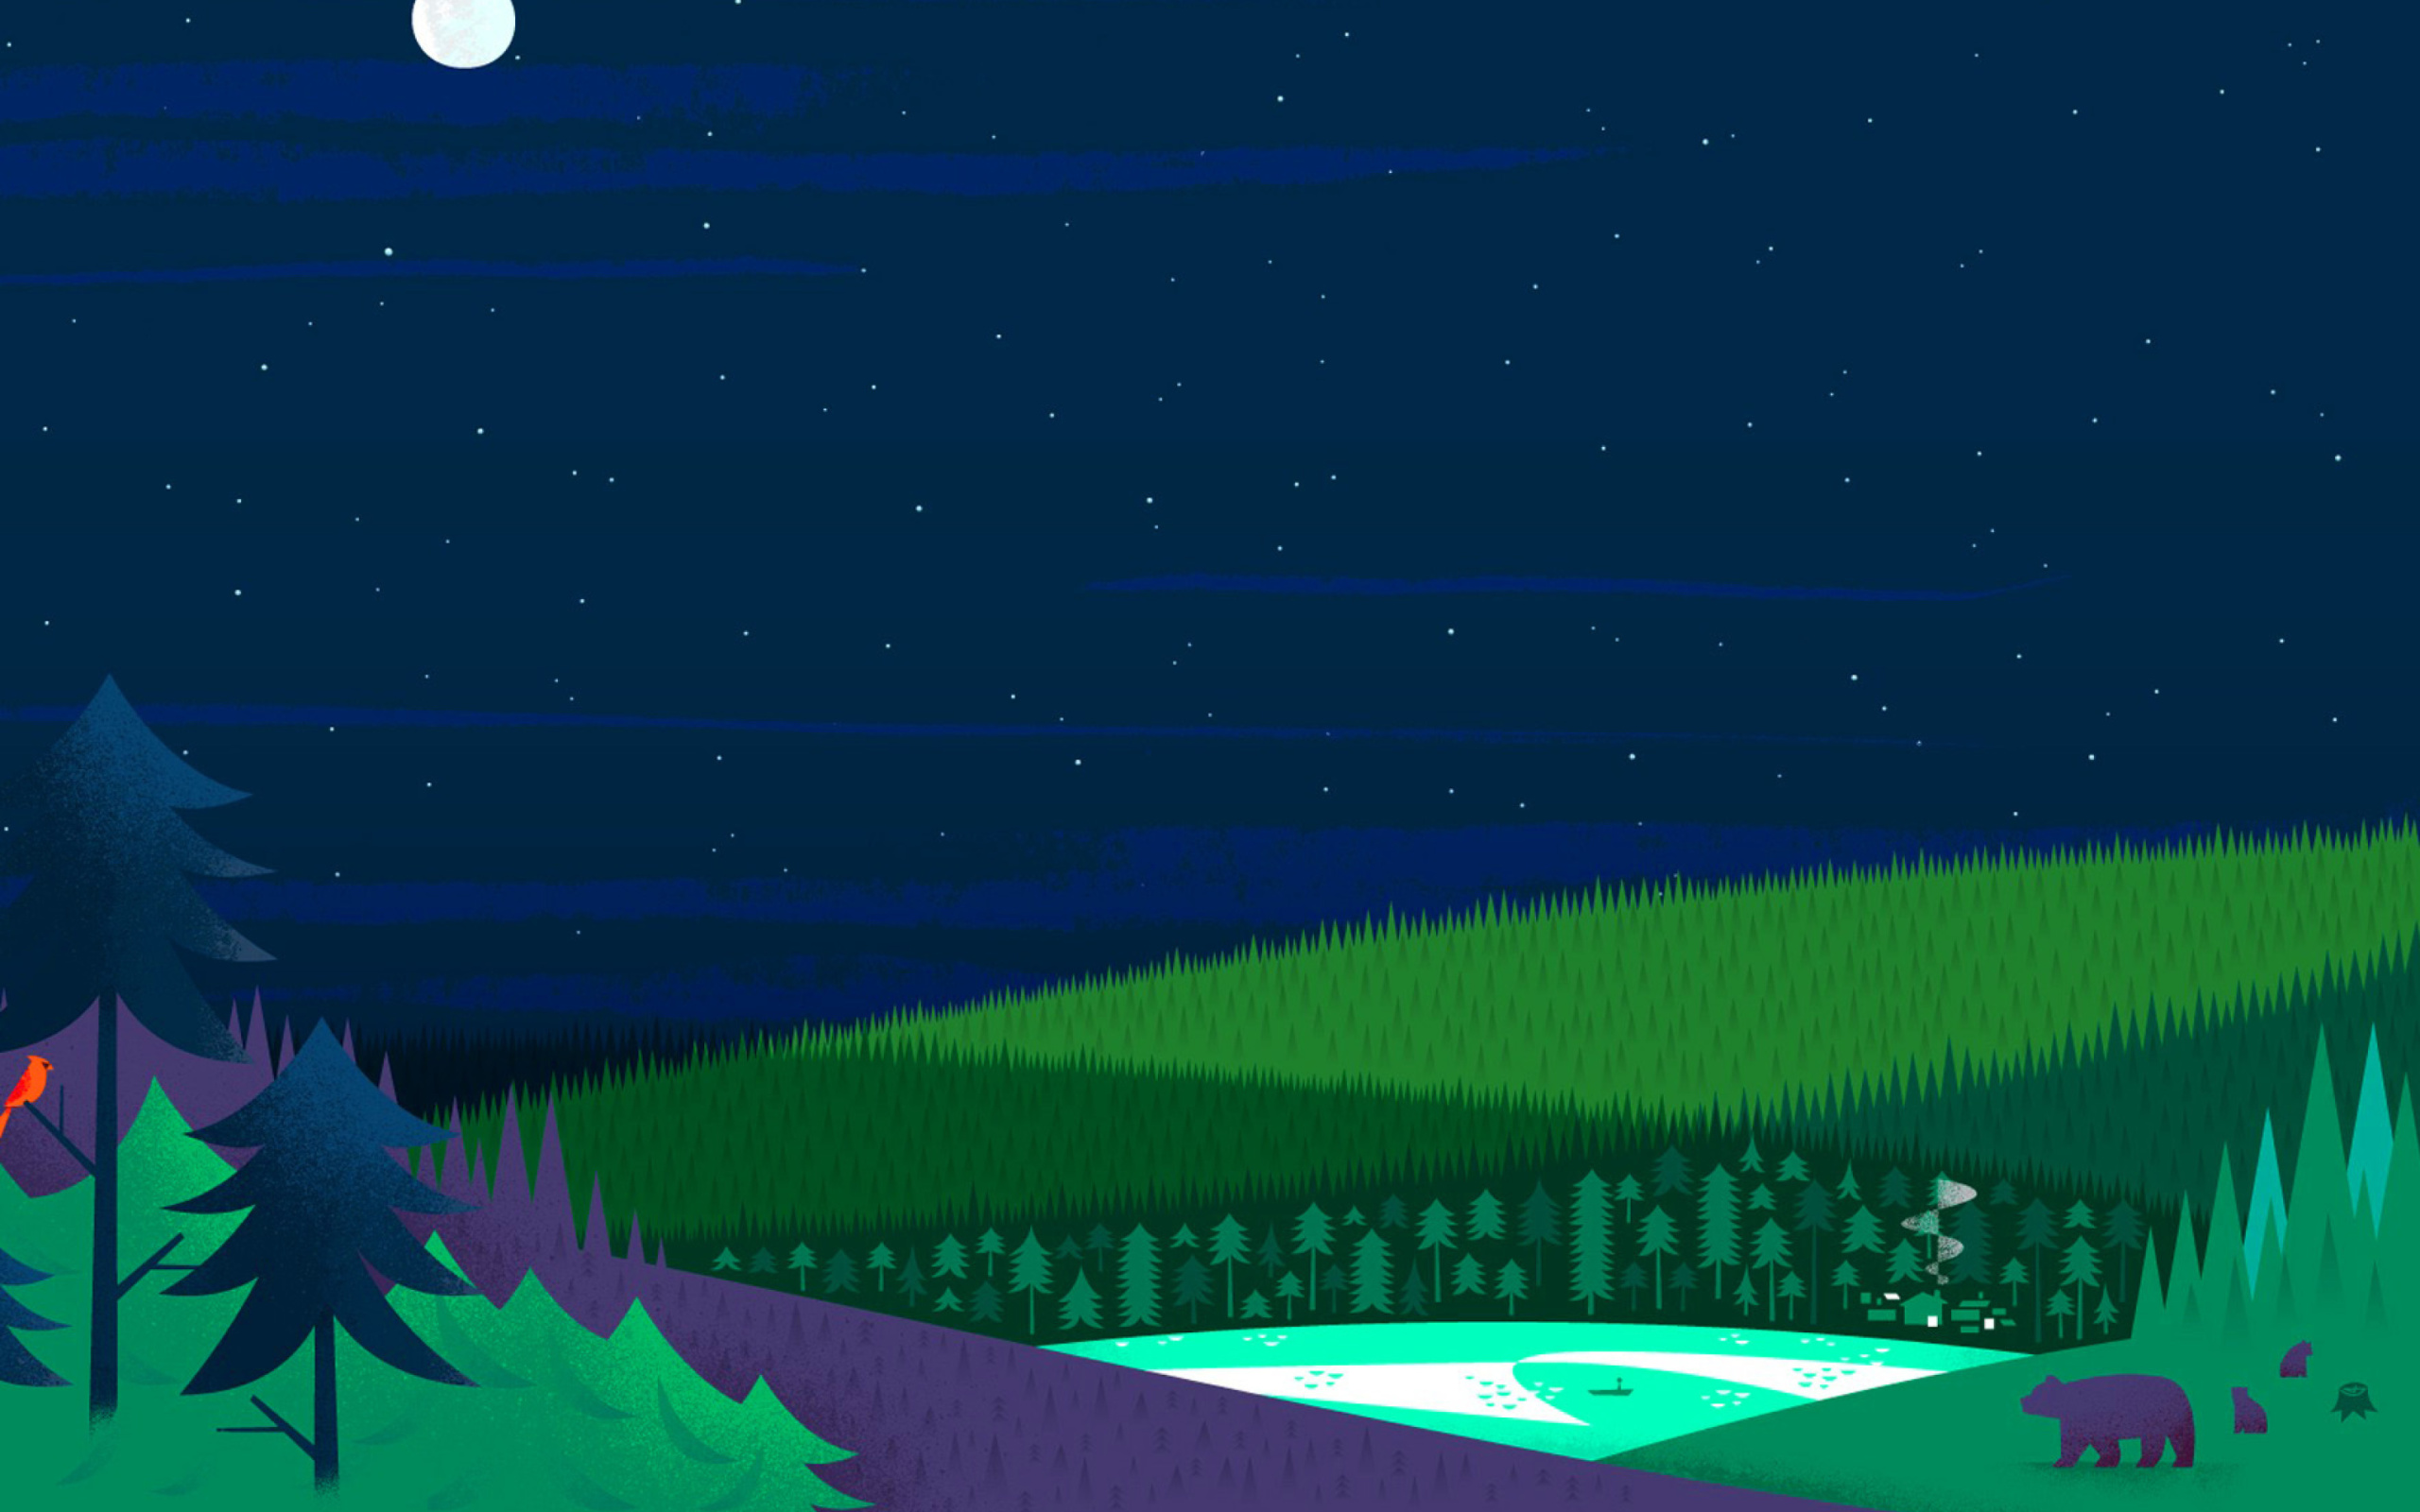 Graphics night and bears in forest screenshot #1 2560x1600